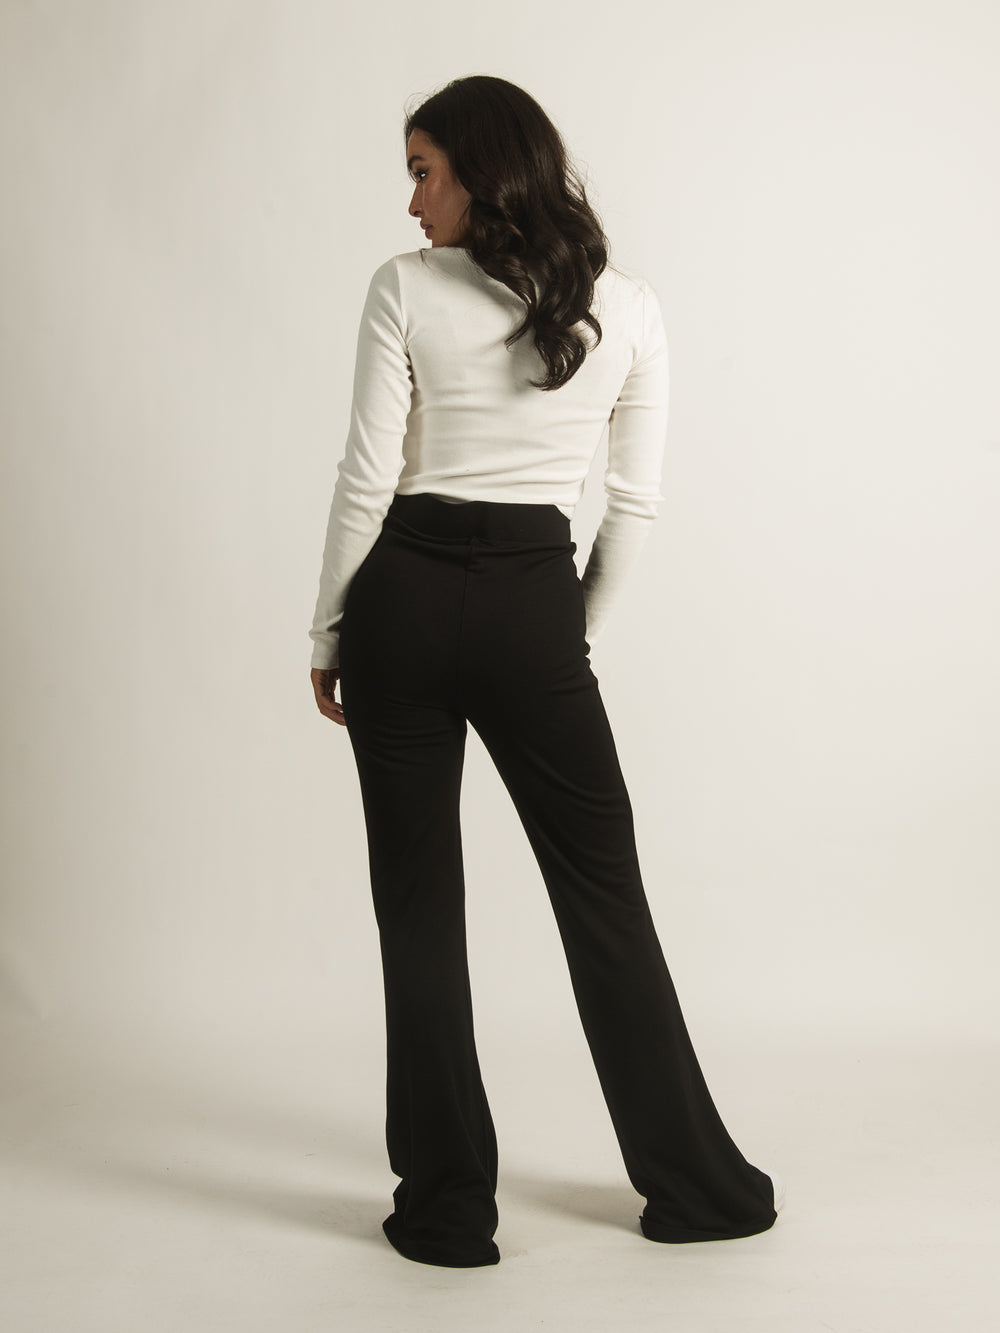 Black Fall Friday Deals Suit Pant for Womens High Waisted Flared